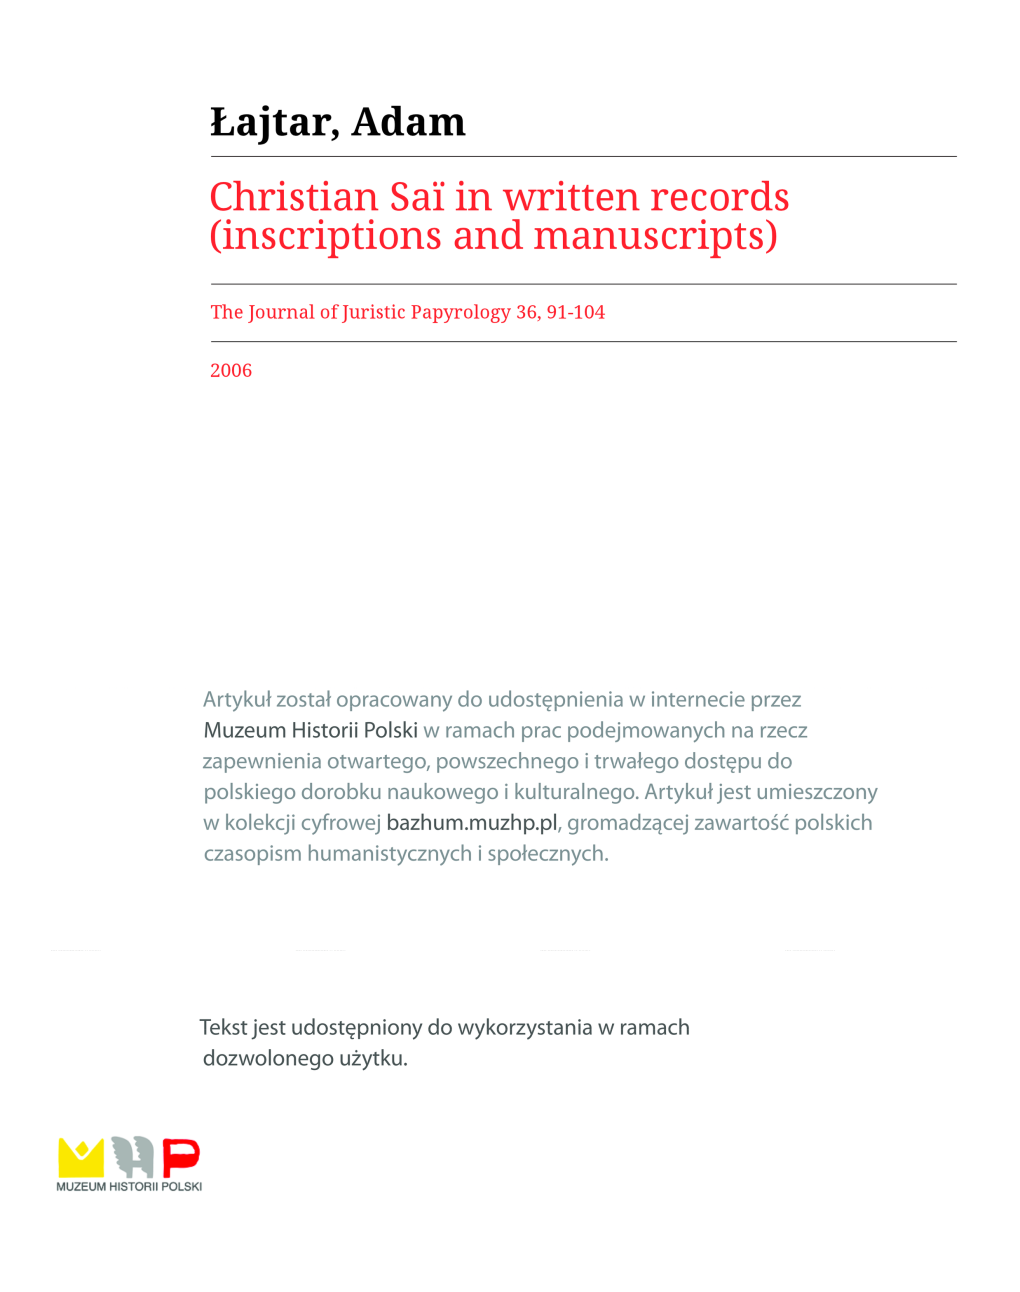 Christian Saï in Written Records (Inscriptions and Manuscripts)*